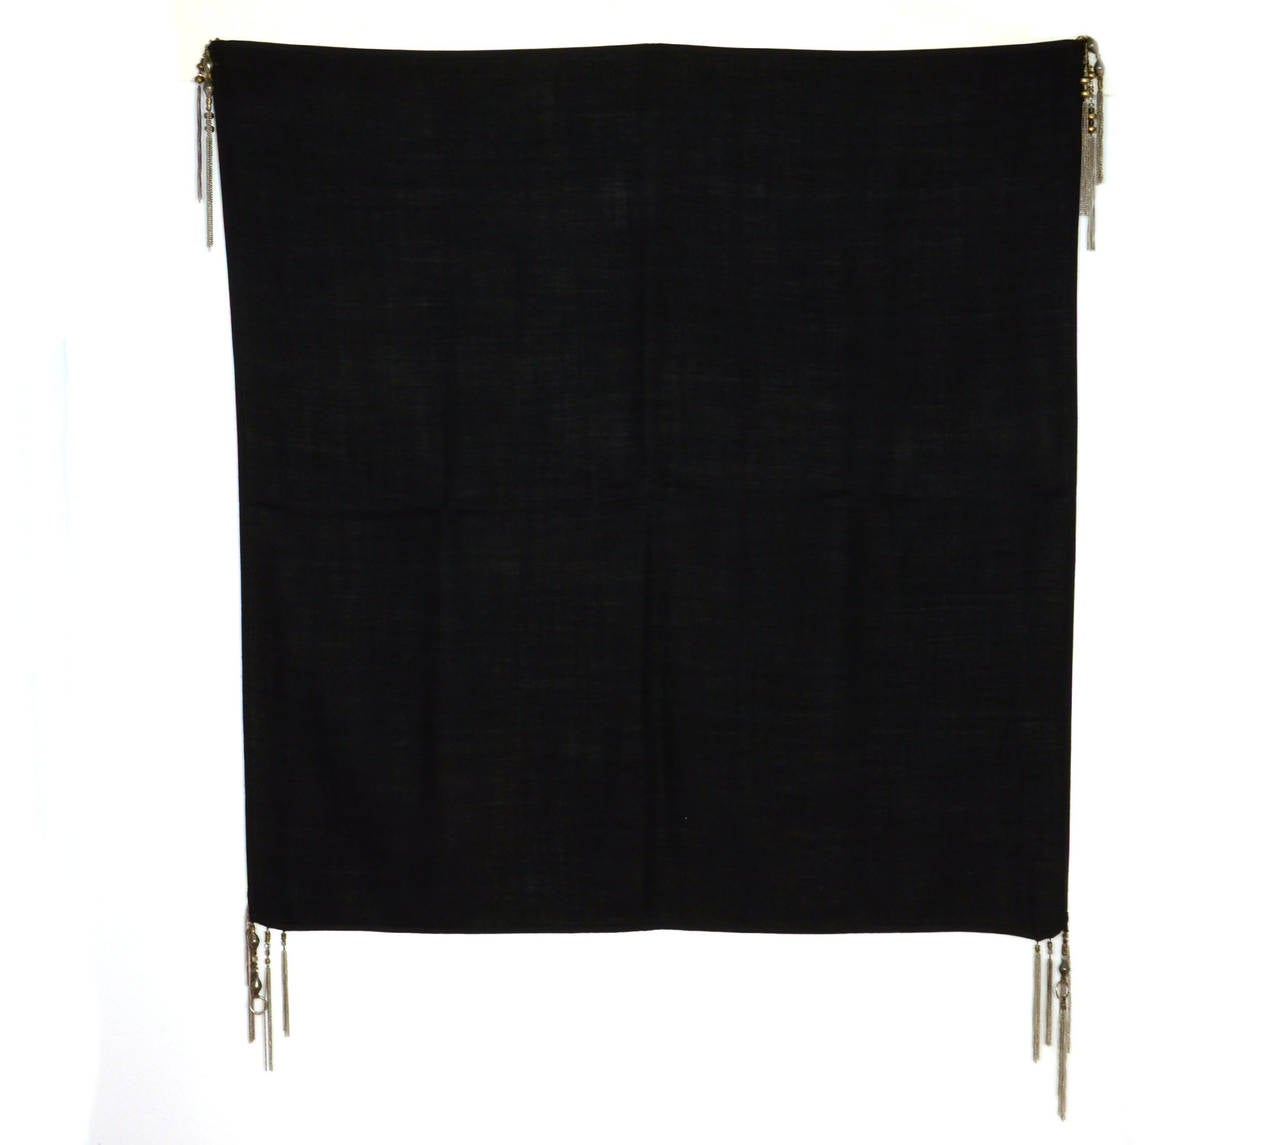 Dries Van Noten Black Cashmere Scarf W/Silver Chain Tassless
Features intricate metal beaded detailing throughout trim
Made in: India
Color: Black
Composition: 100% Cashmere
Overall Condition: Excellent with the exception of very minor